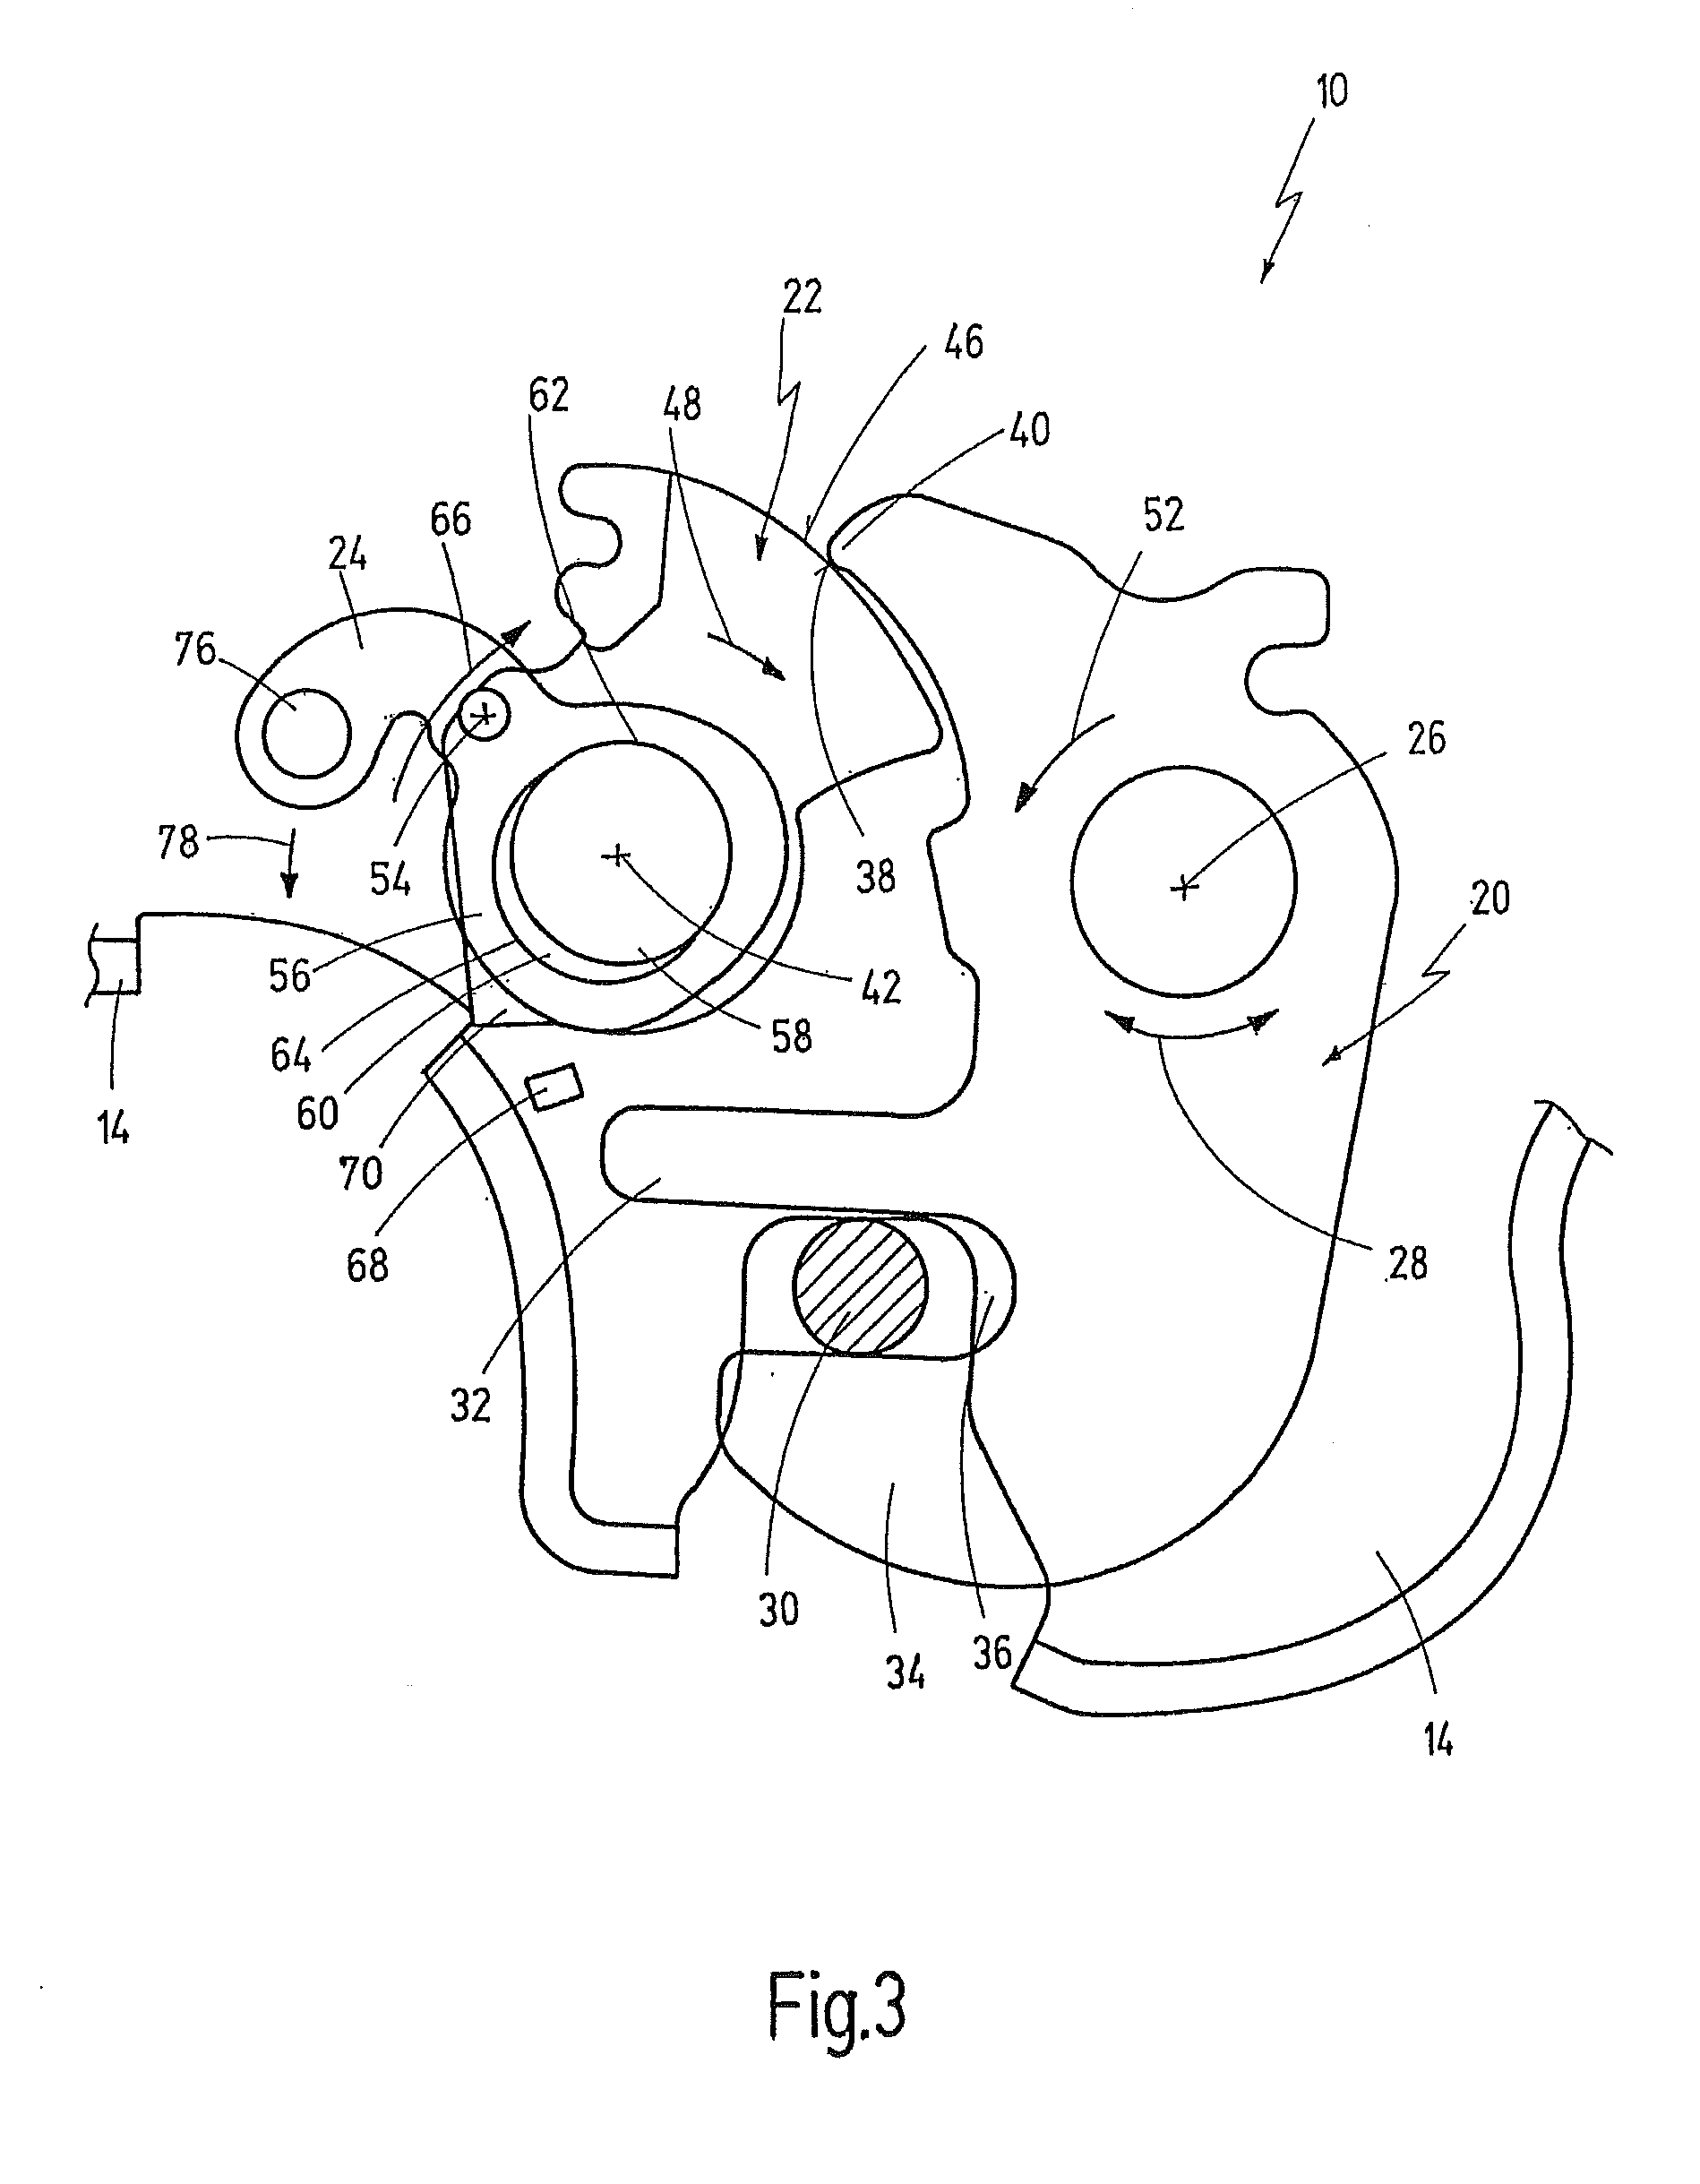 Device for locking a vehicle seat